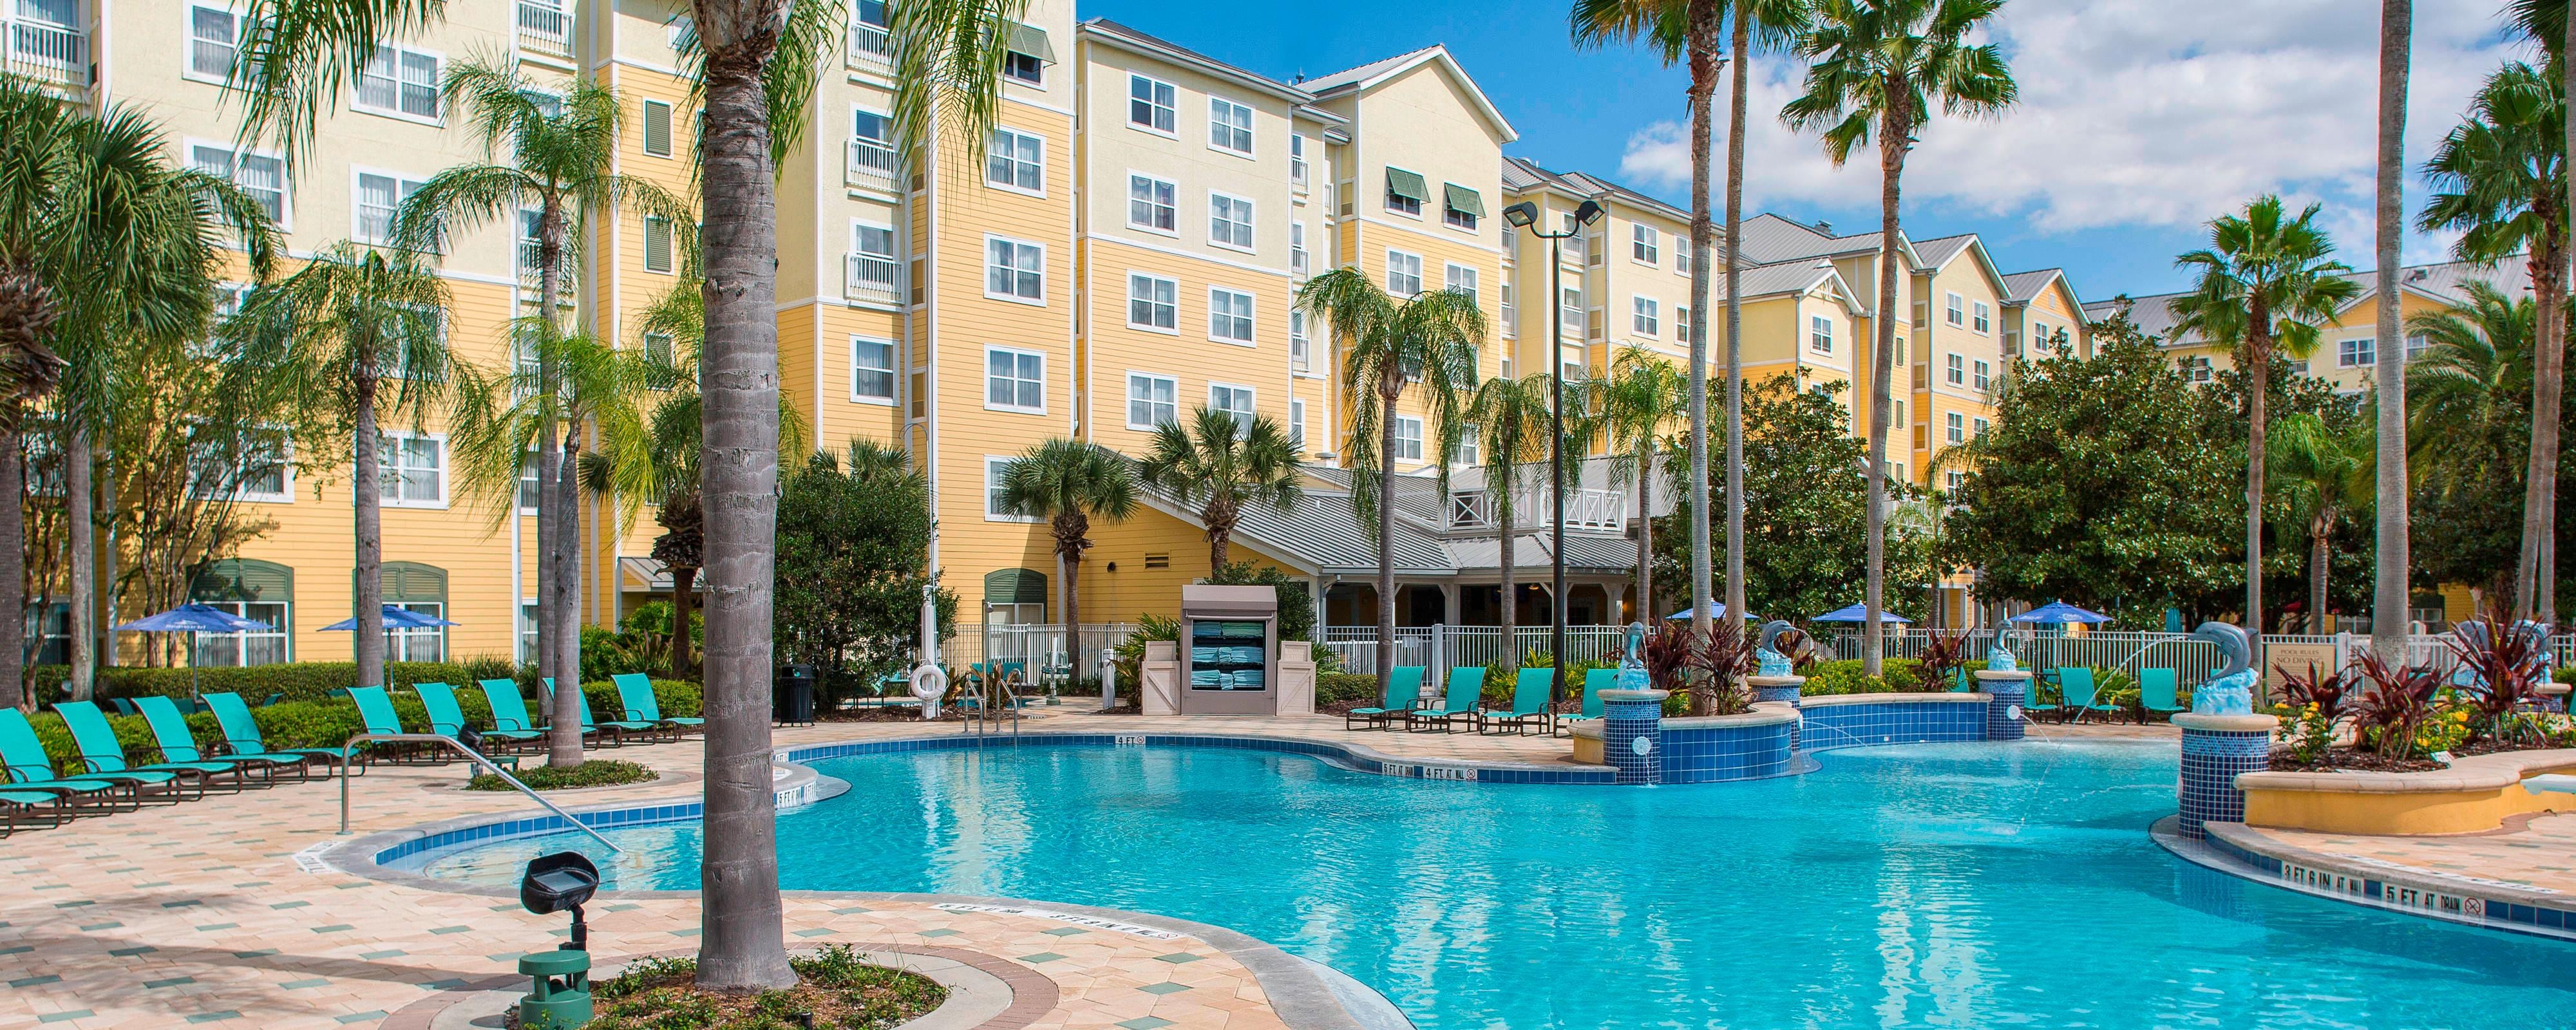 Stay Near Discovery Cove Residence Inn Orlando At Seaworld